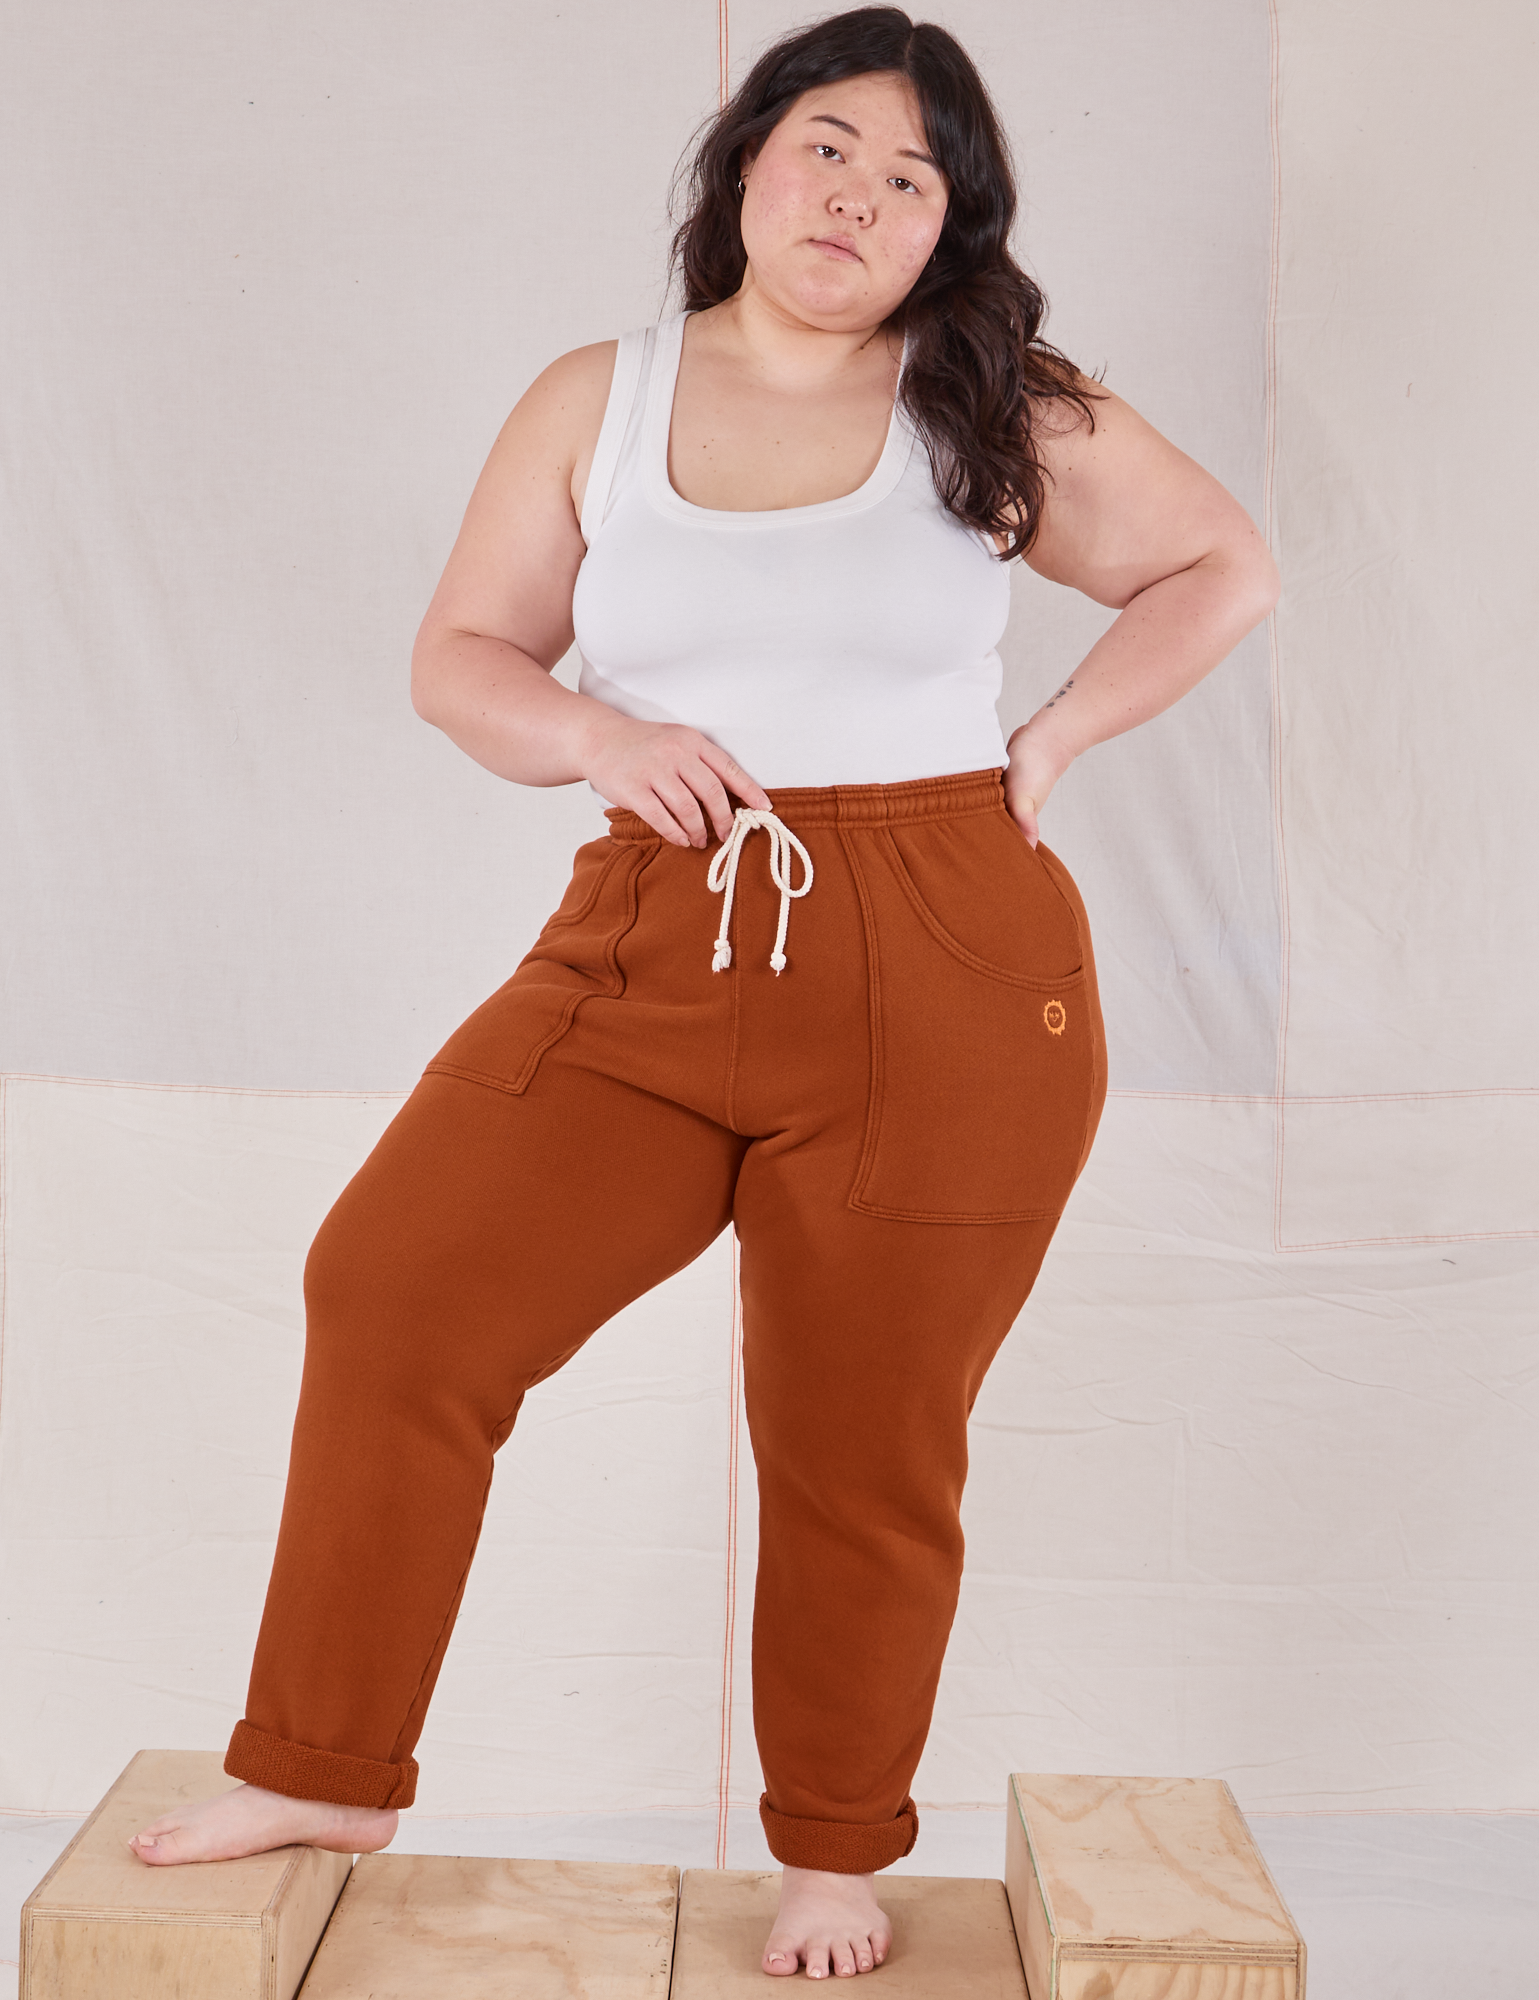 Ashley is 5'7" and wearing L Rolled Cuff Sweat Pants in Burnt Terracotta paired with vintage off-white Cropped Tank Top